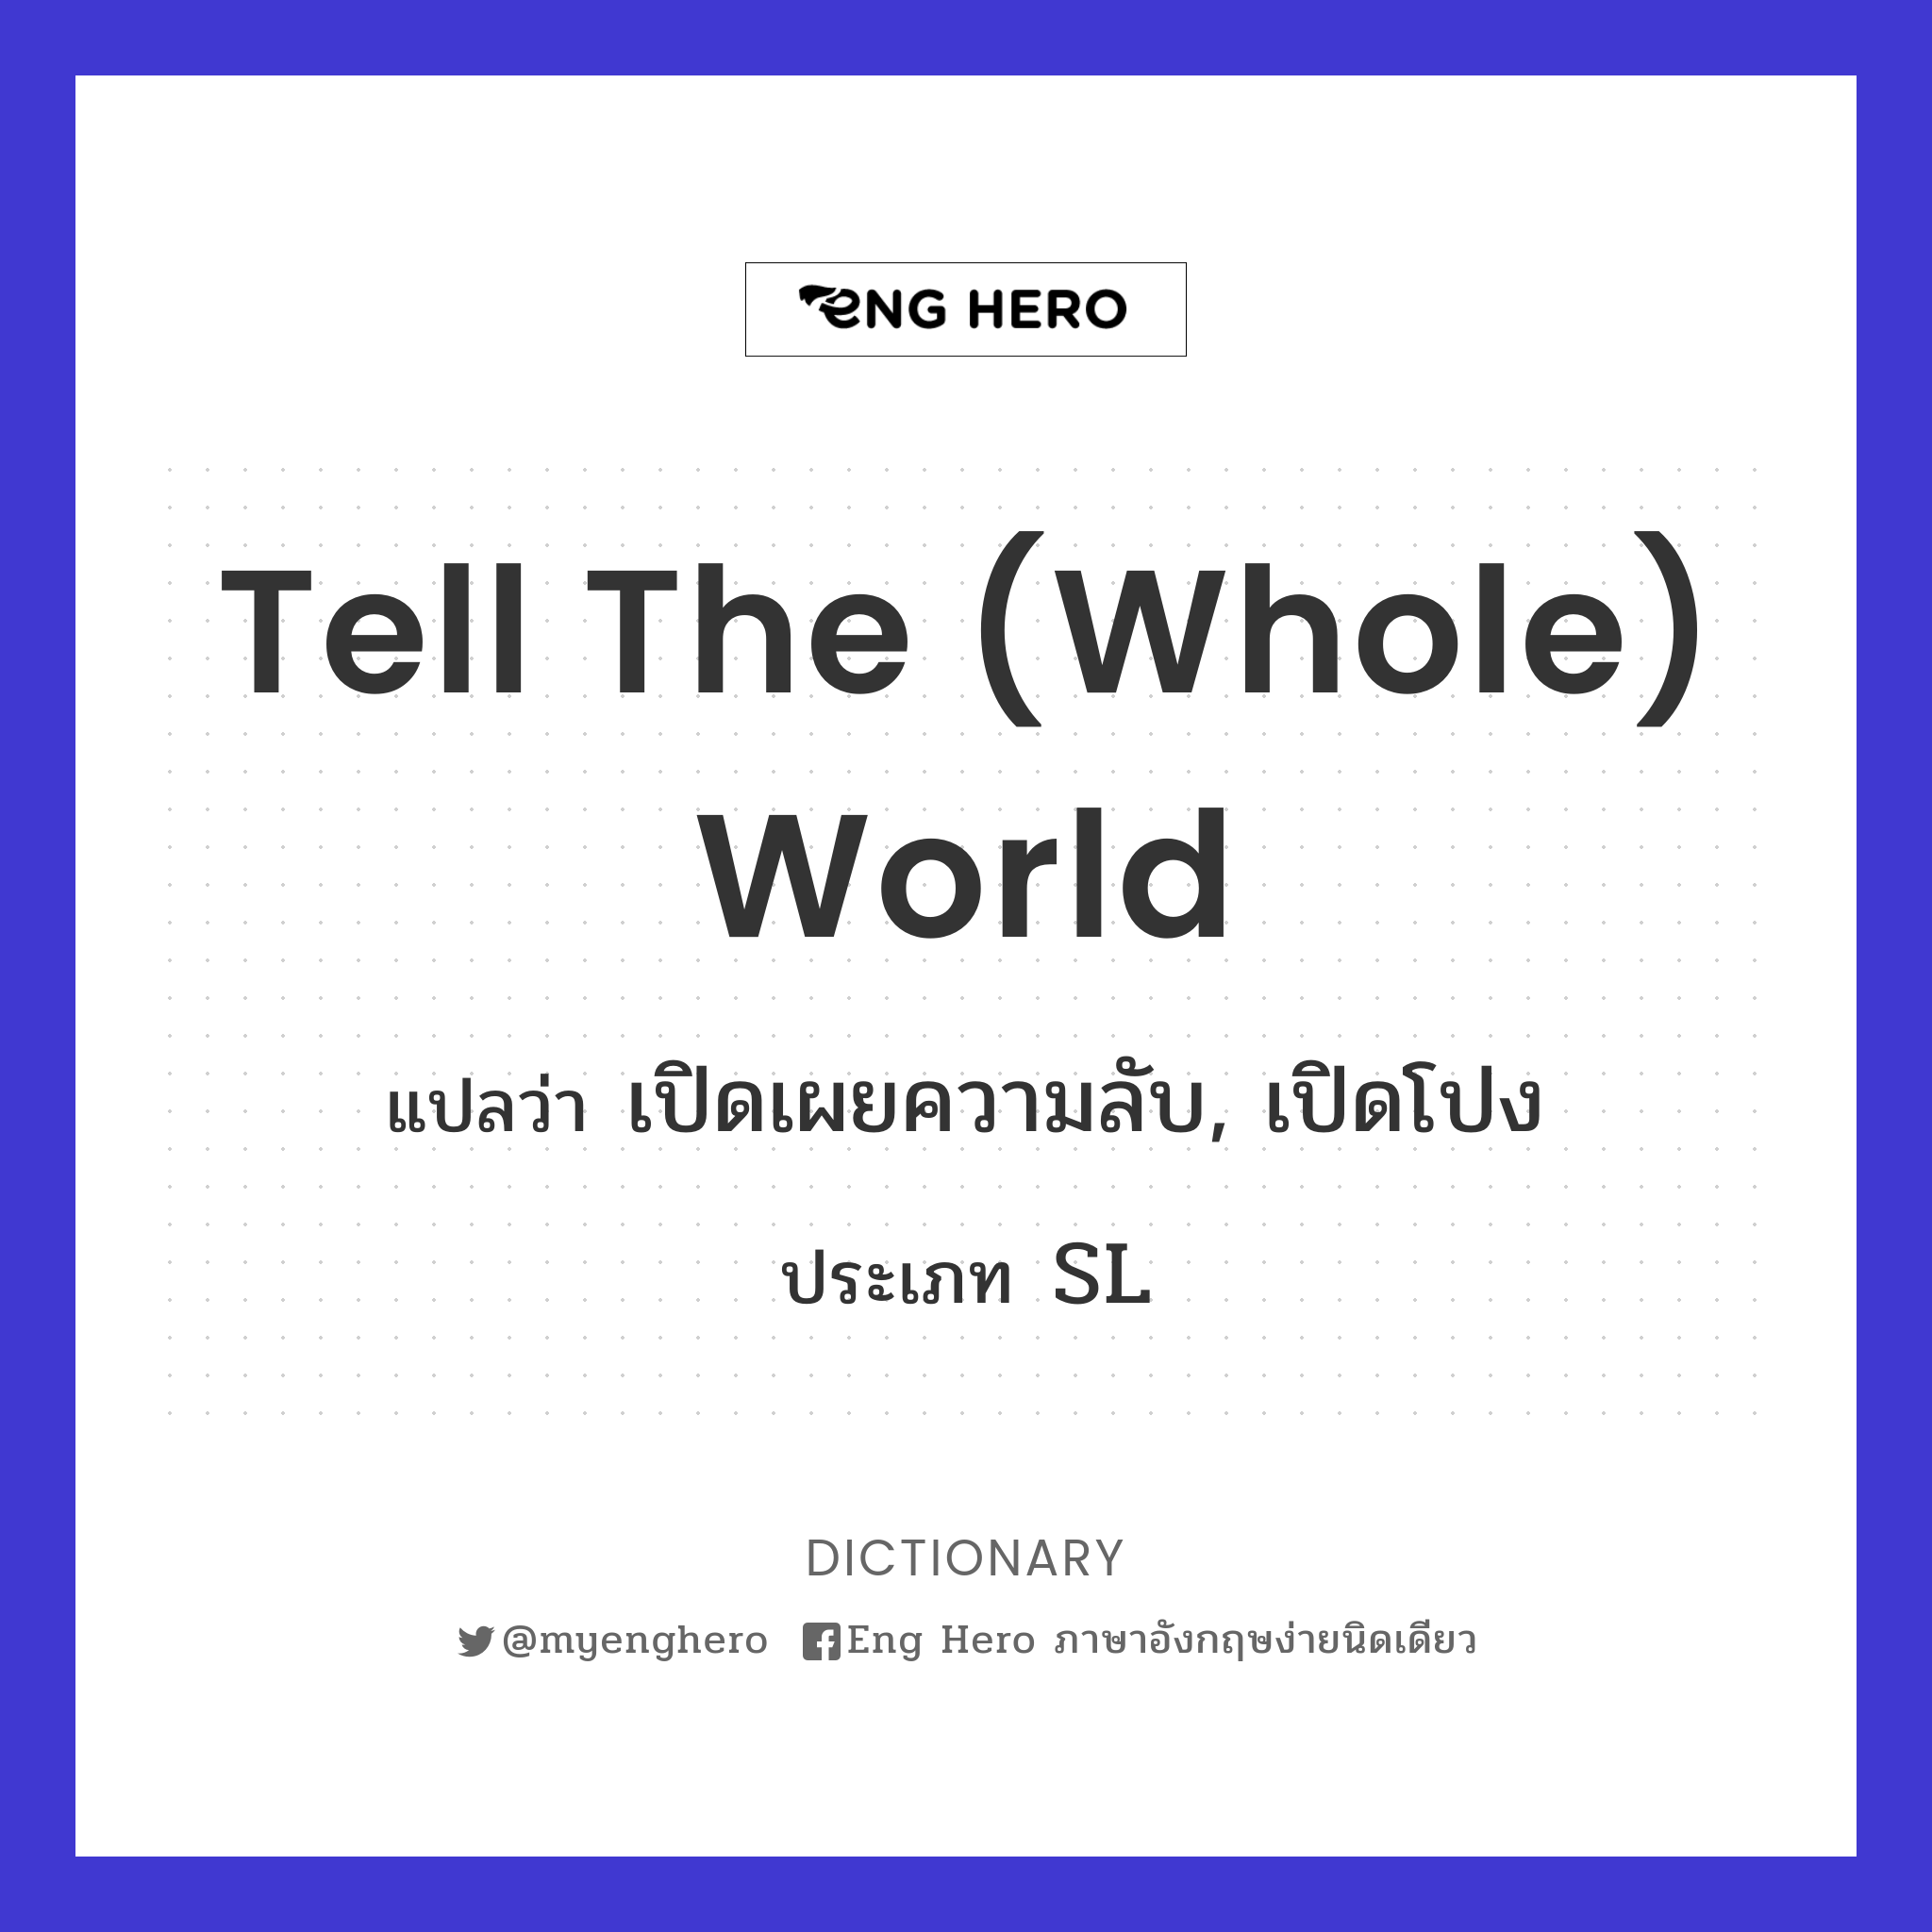 tell the (whole) world